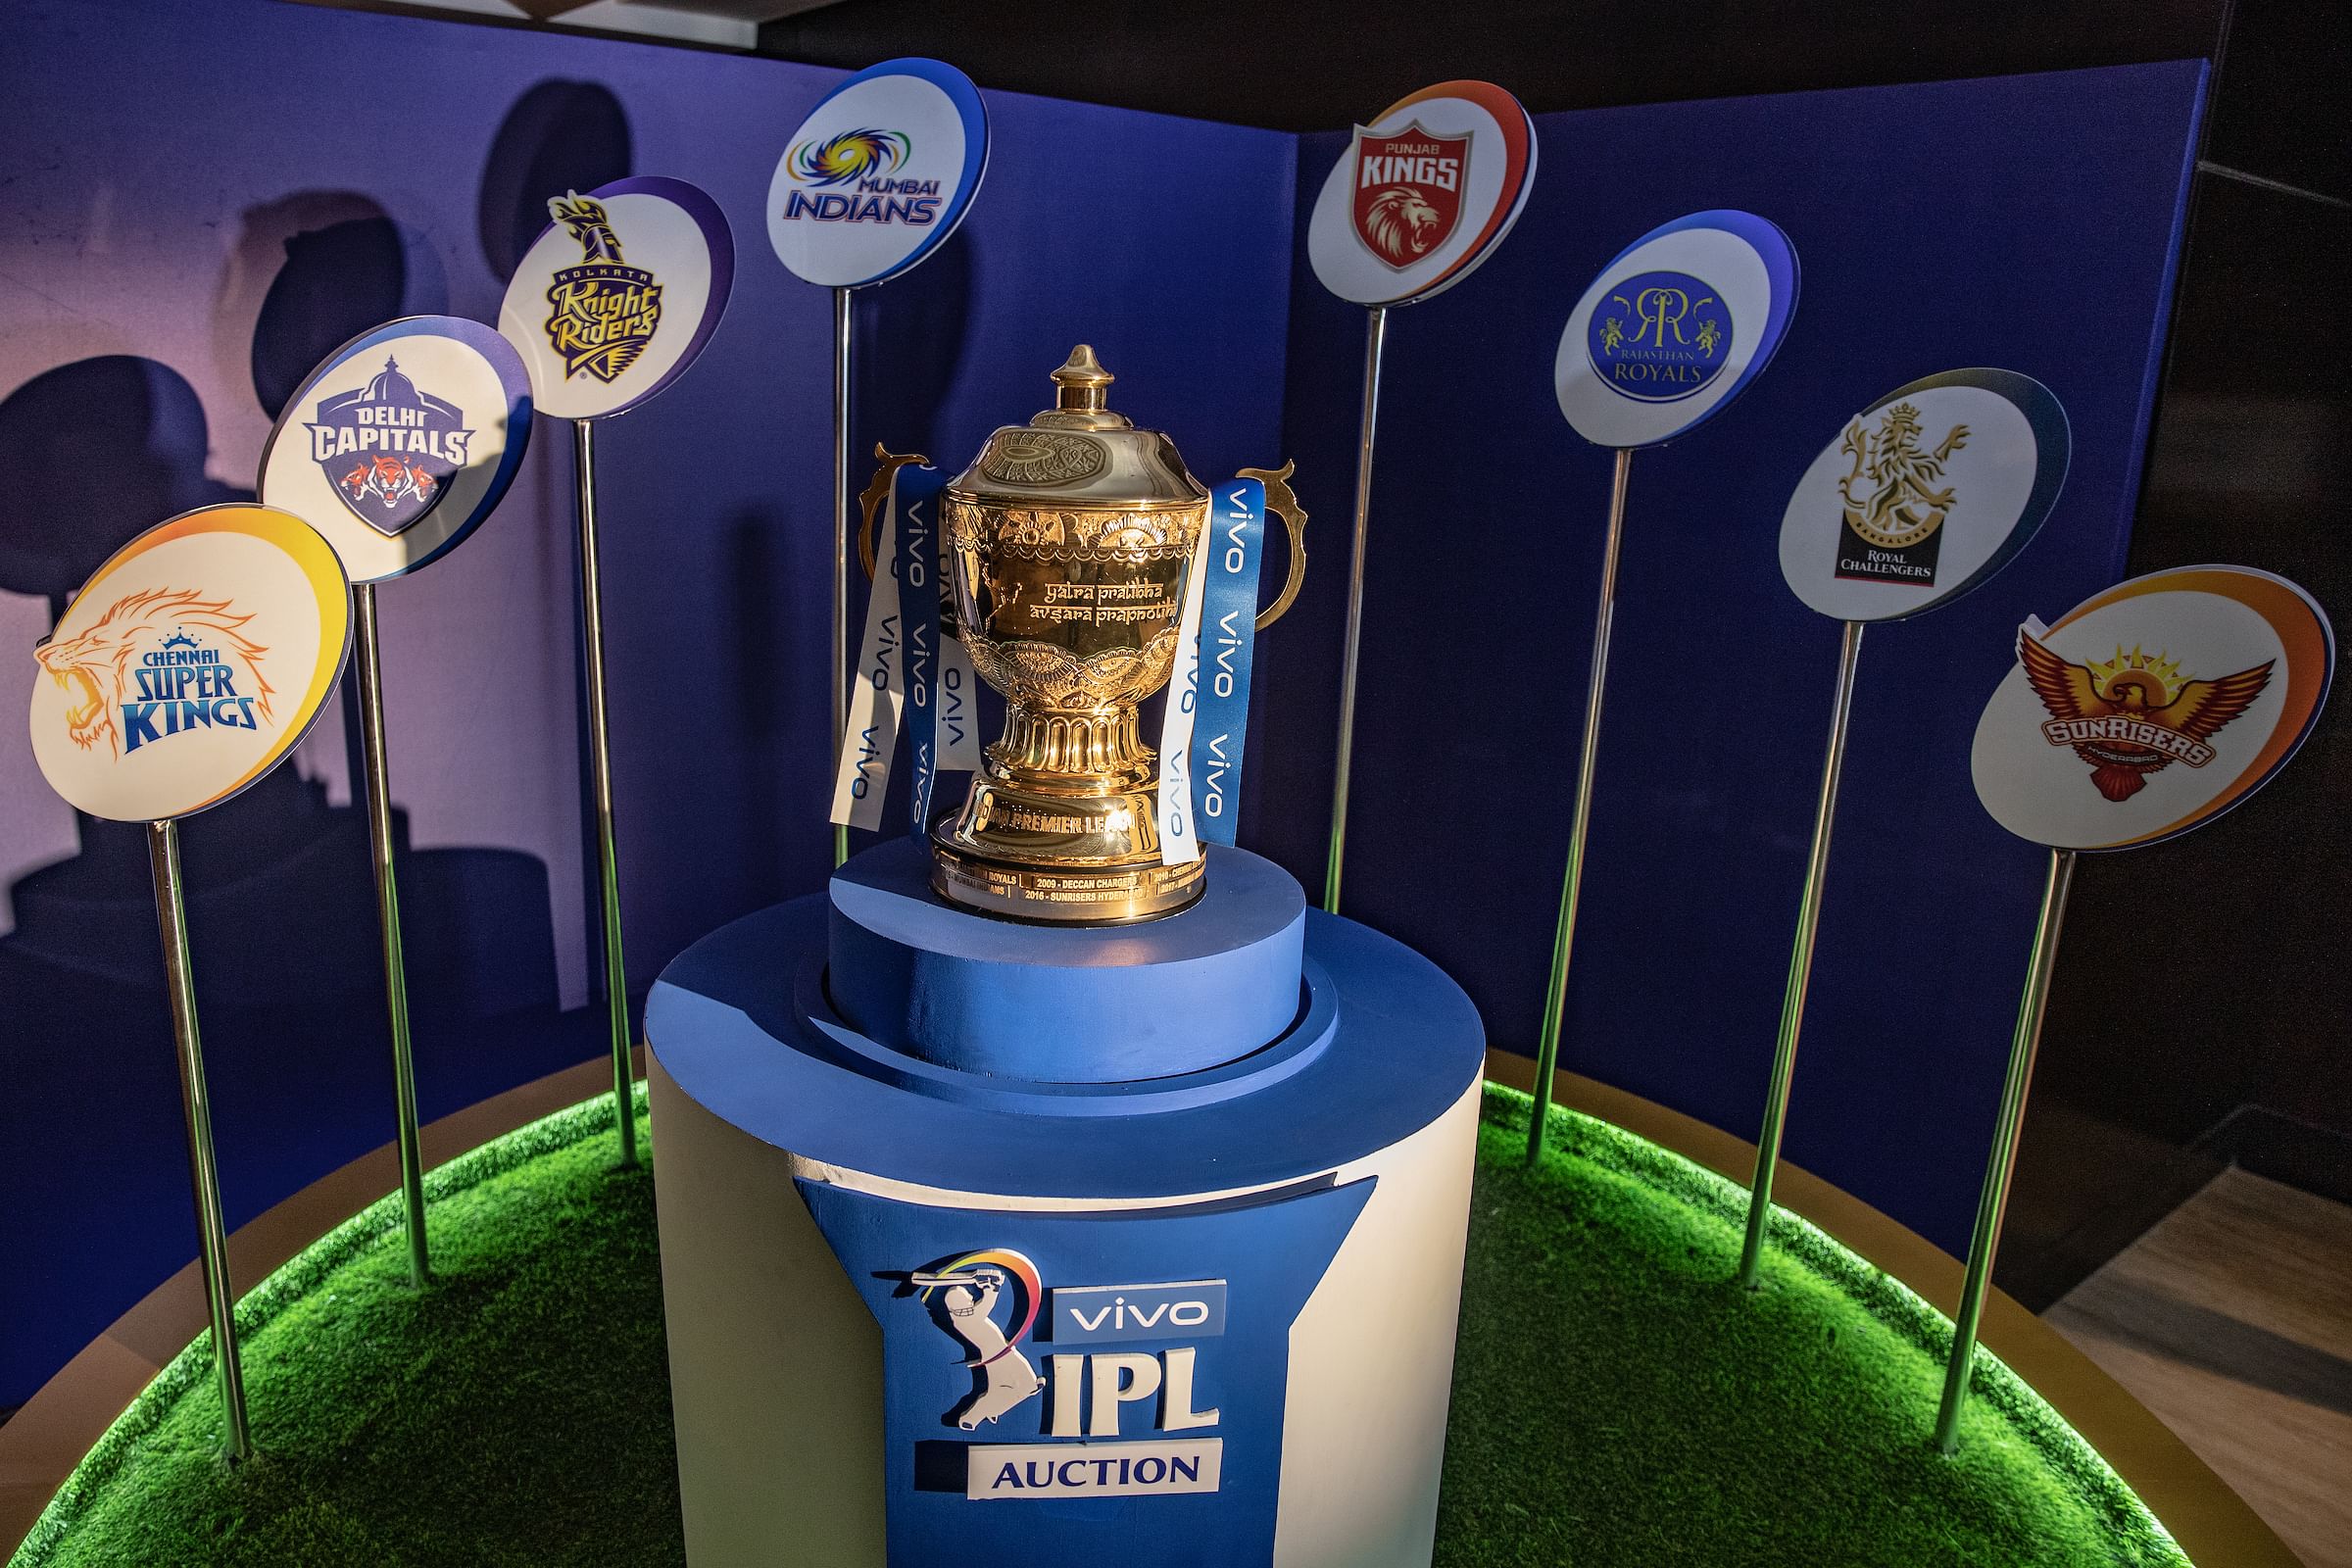 IPL 2021 – All About IPL Teams and Players